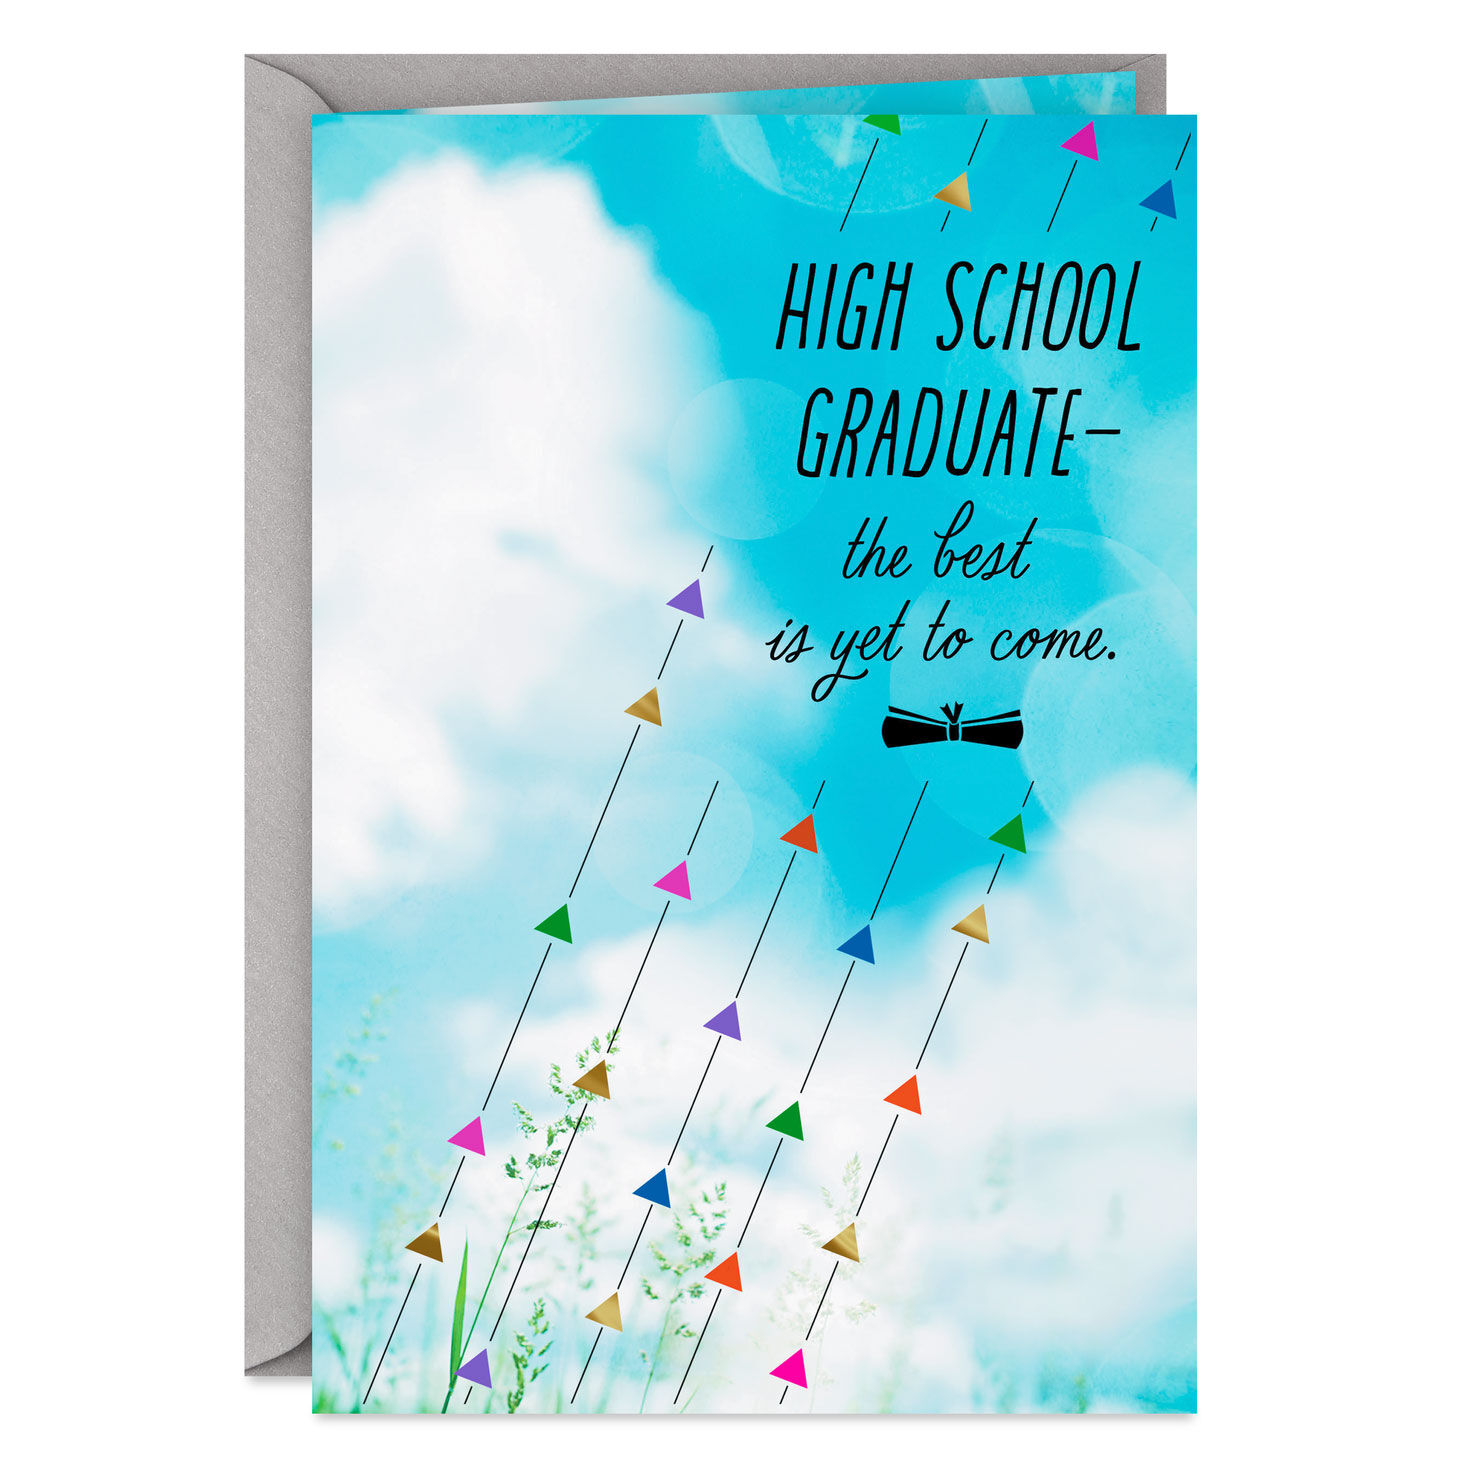 The Best Is Yet to Come High School Graduation Card for only USD 2.00 | Hallmark